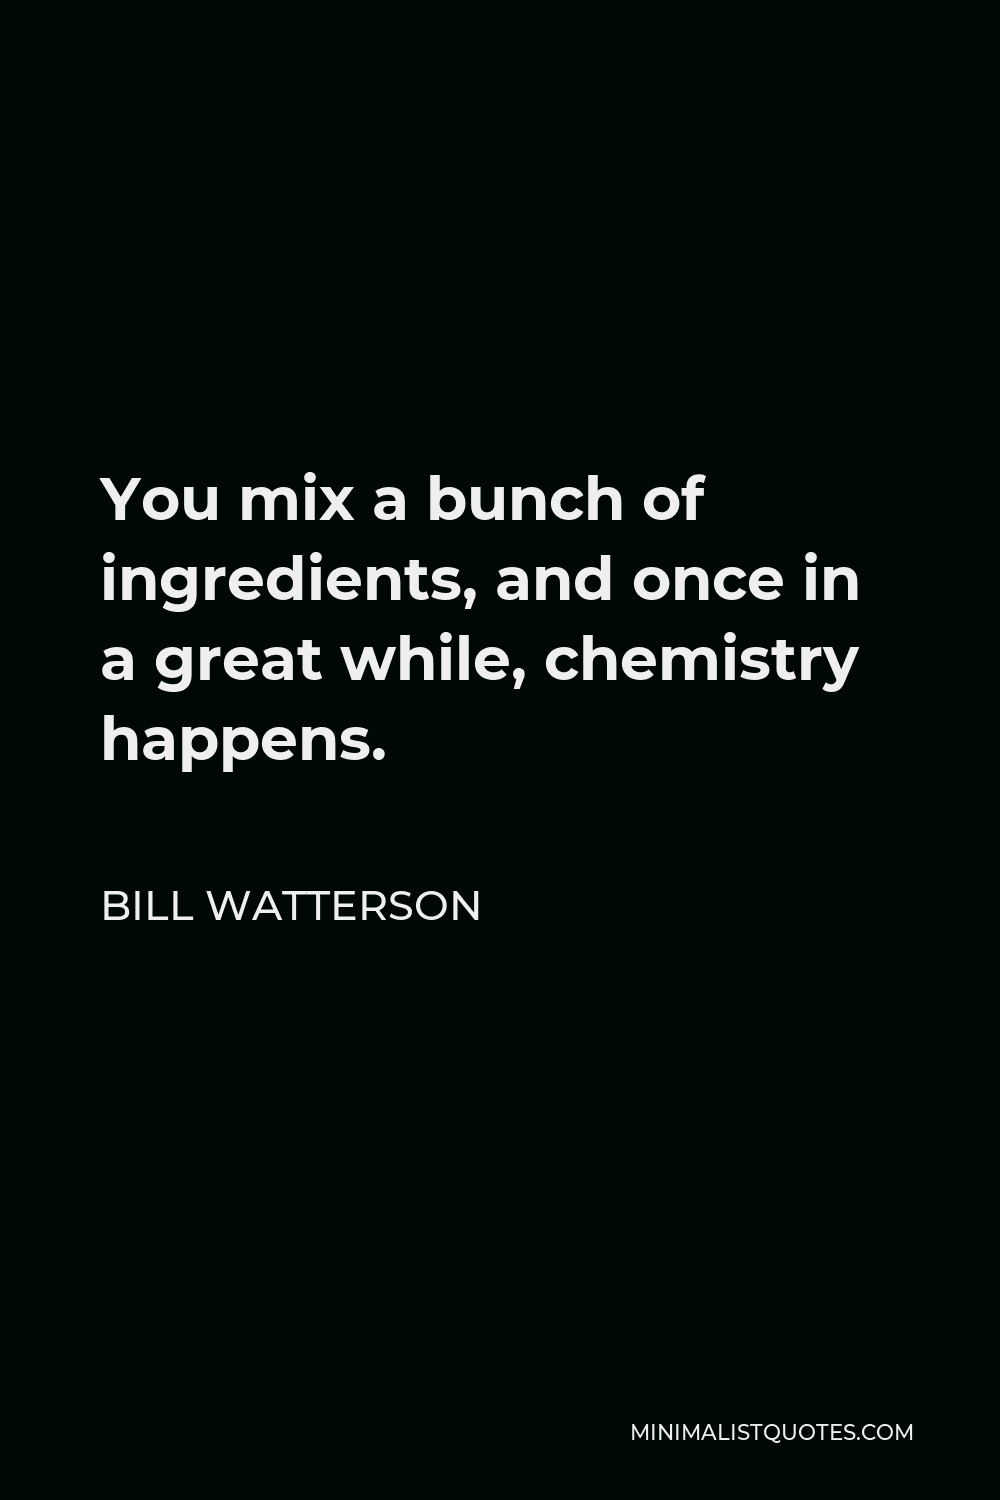 Bill Watterson Quote - You mix a bunch of ingredients, and once in a great while, chemistry happens.